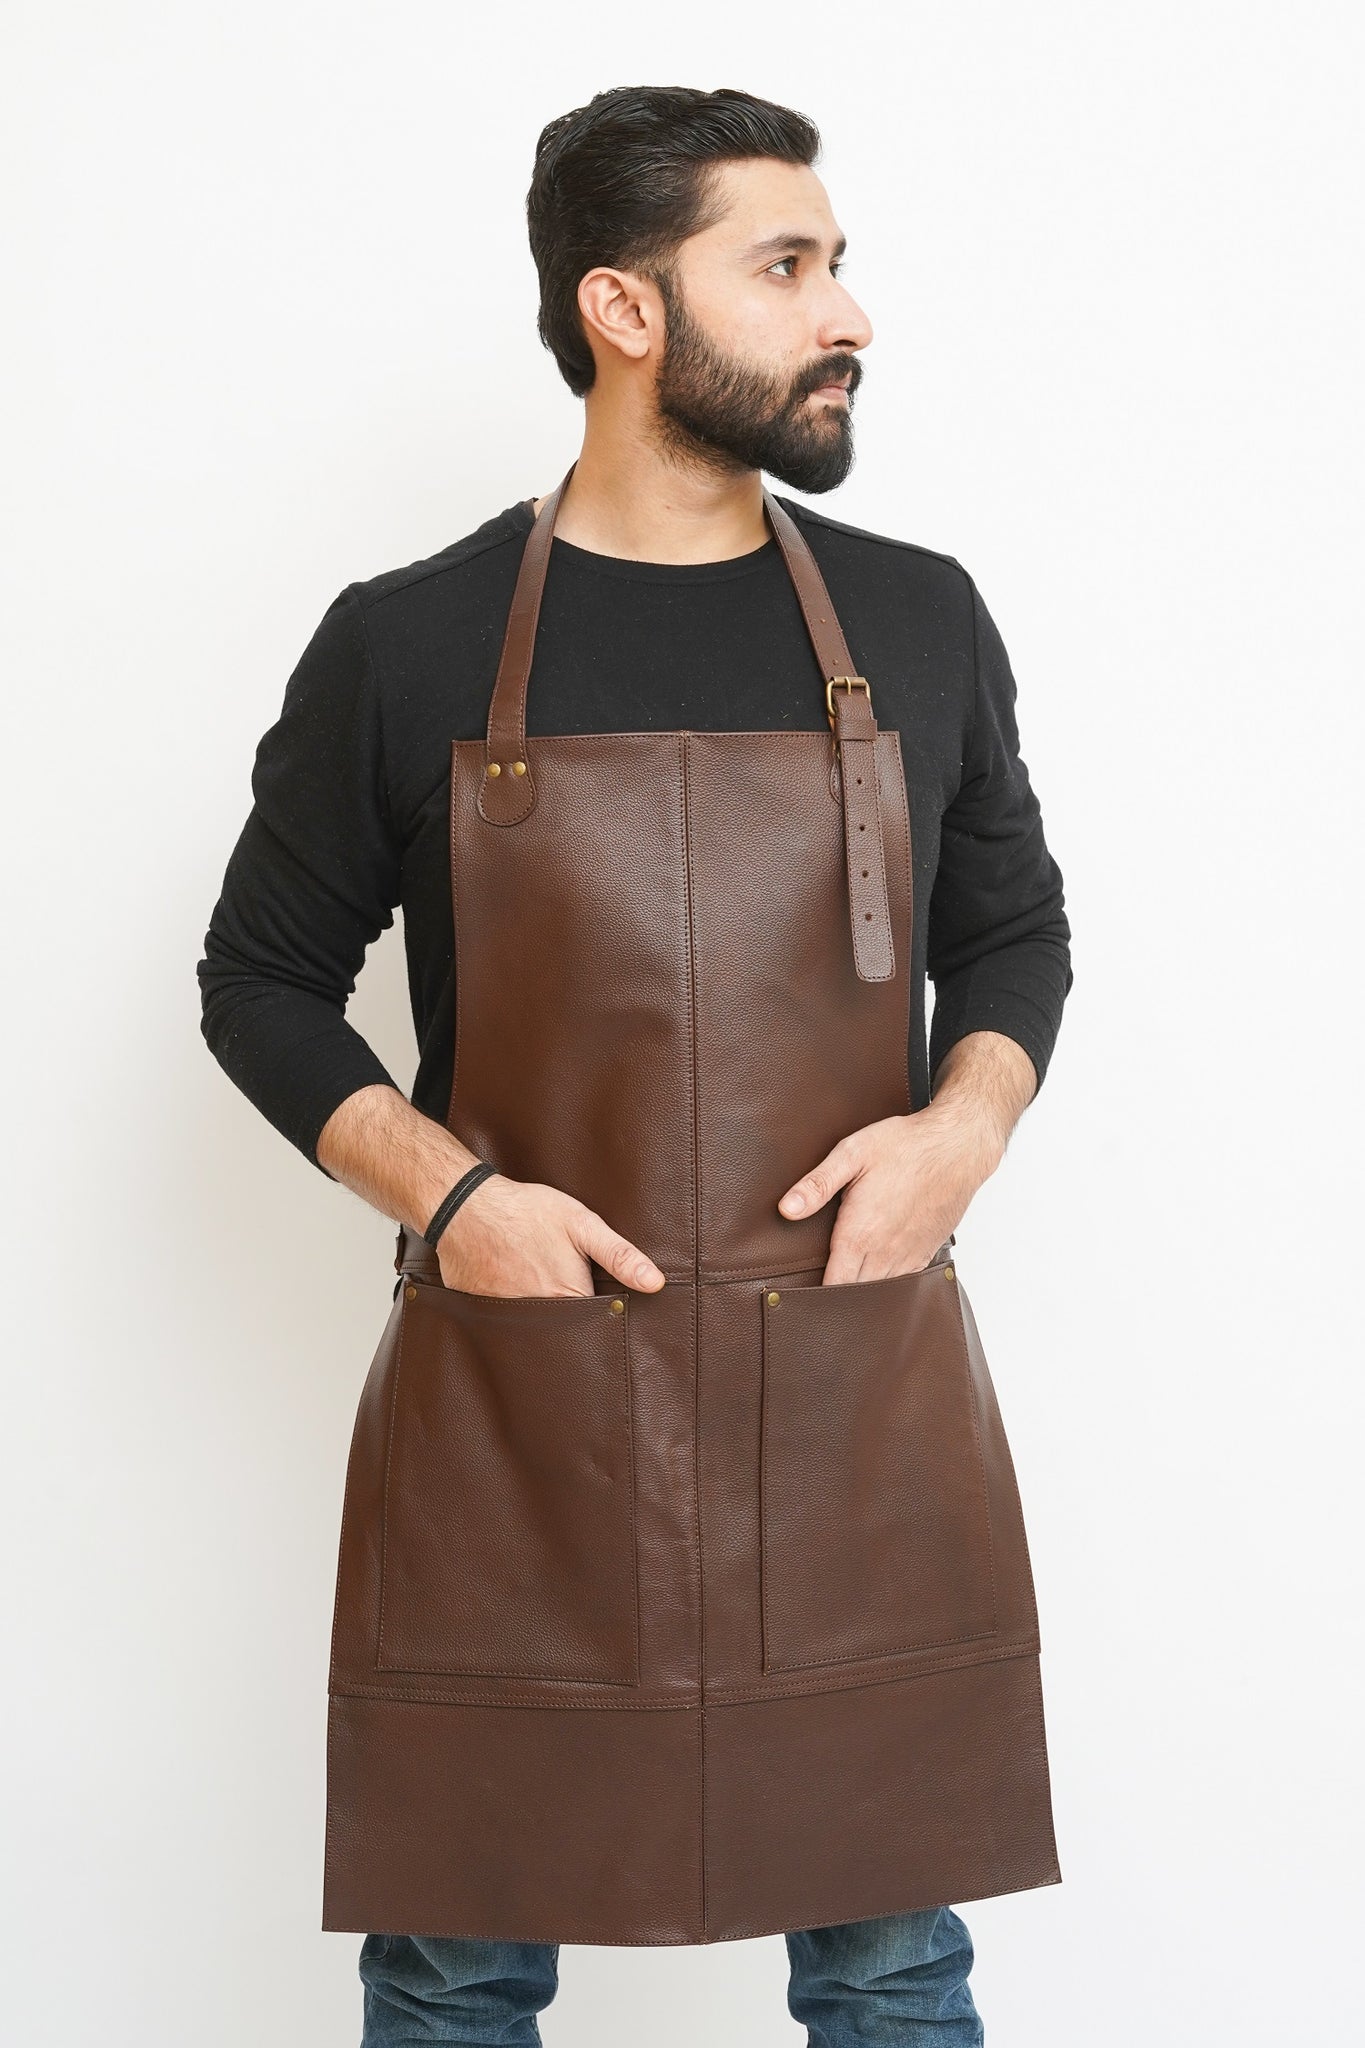 Leather Apron - Grill Apron, Bbq Apron, Woodworking Apron, Barber Apron